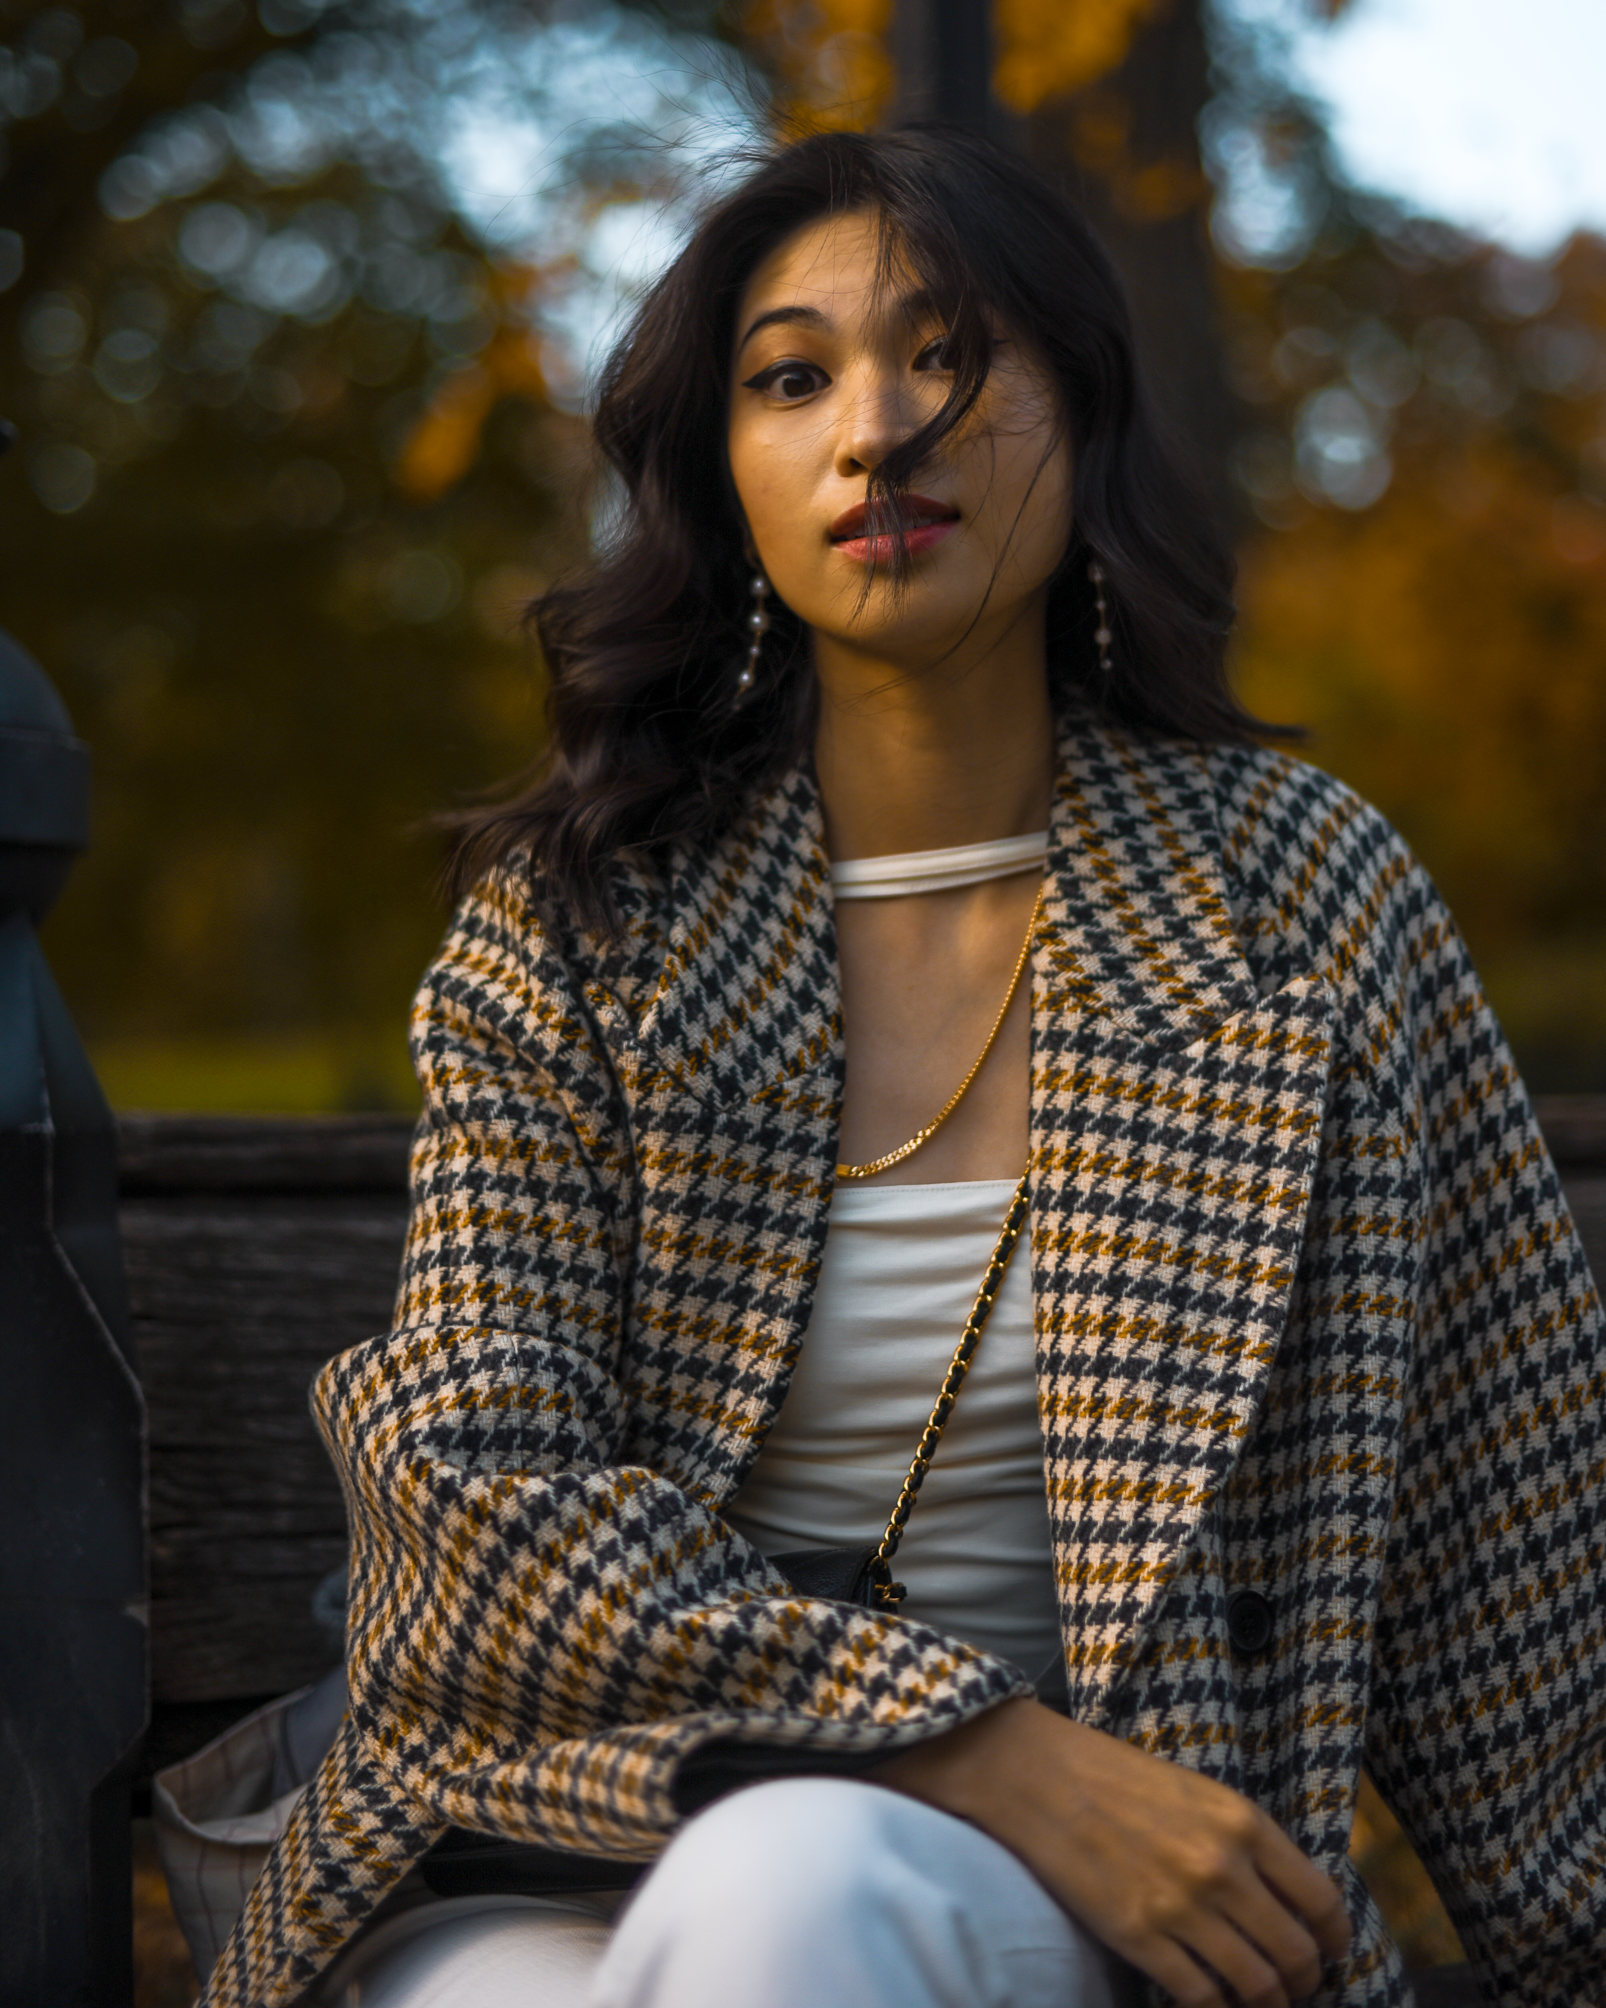 Fall plaid oversized coat, beige outfit ideas for fall, fall style in New York, Central Park fashion photo ideas - FOREVERVANNY.com